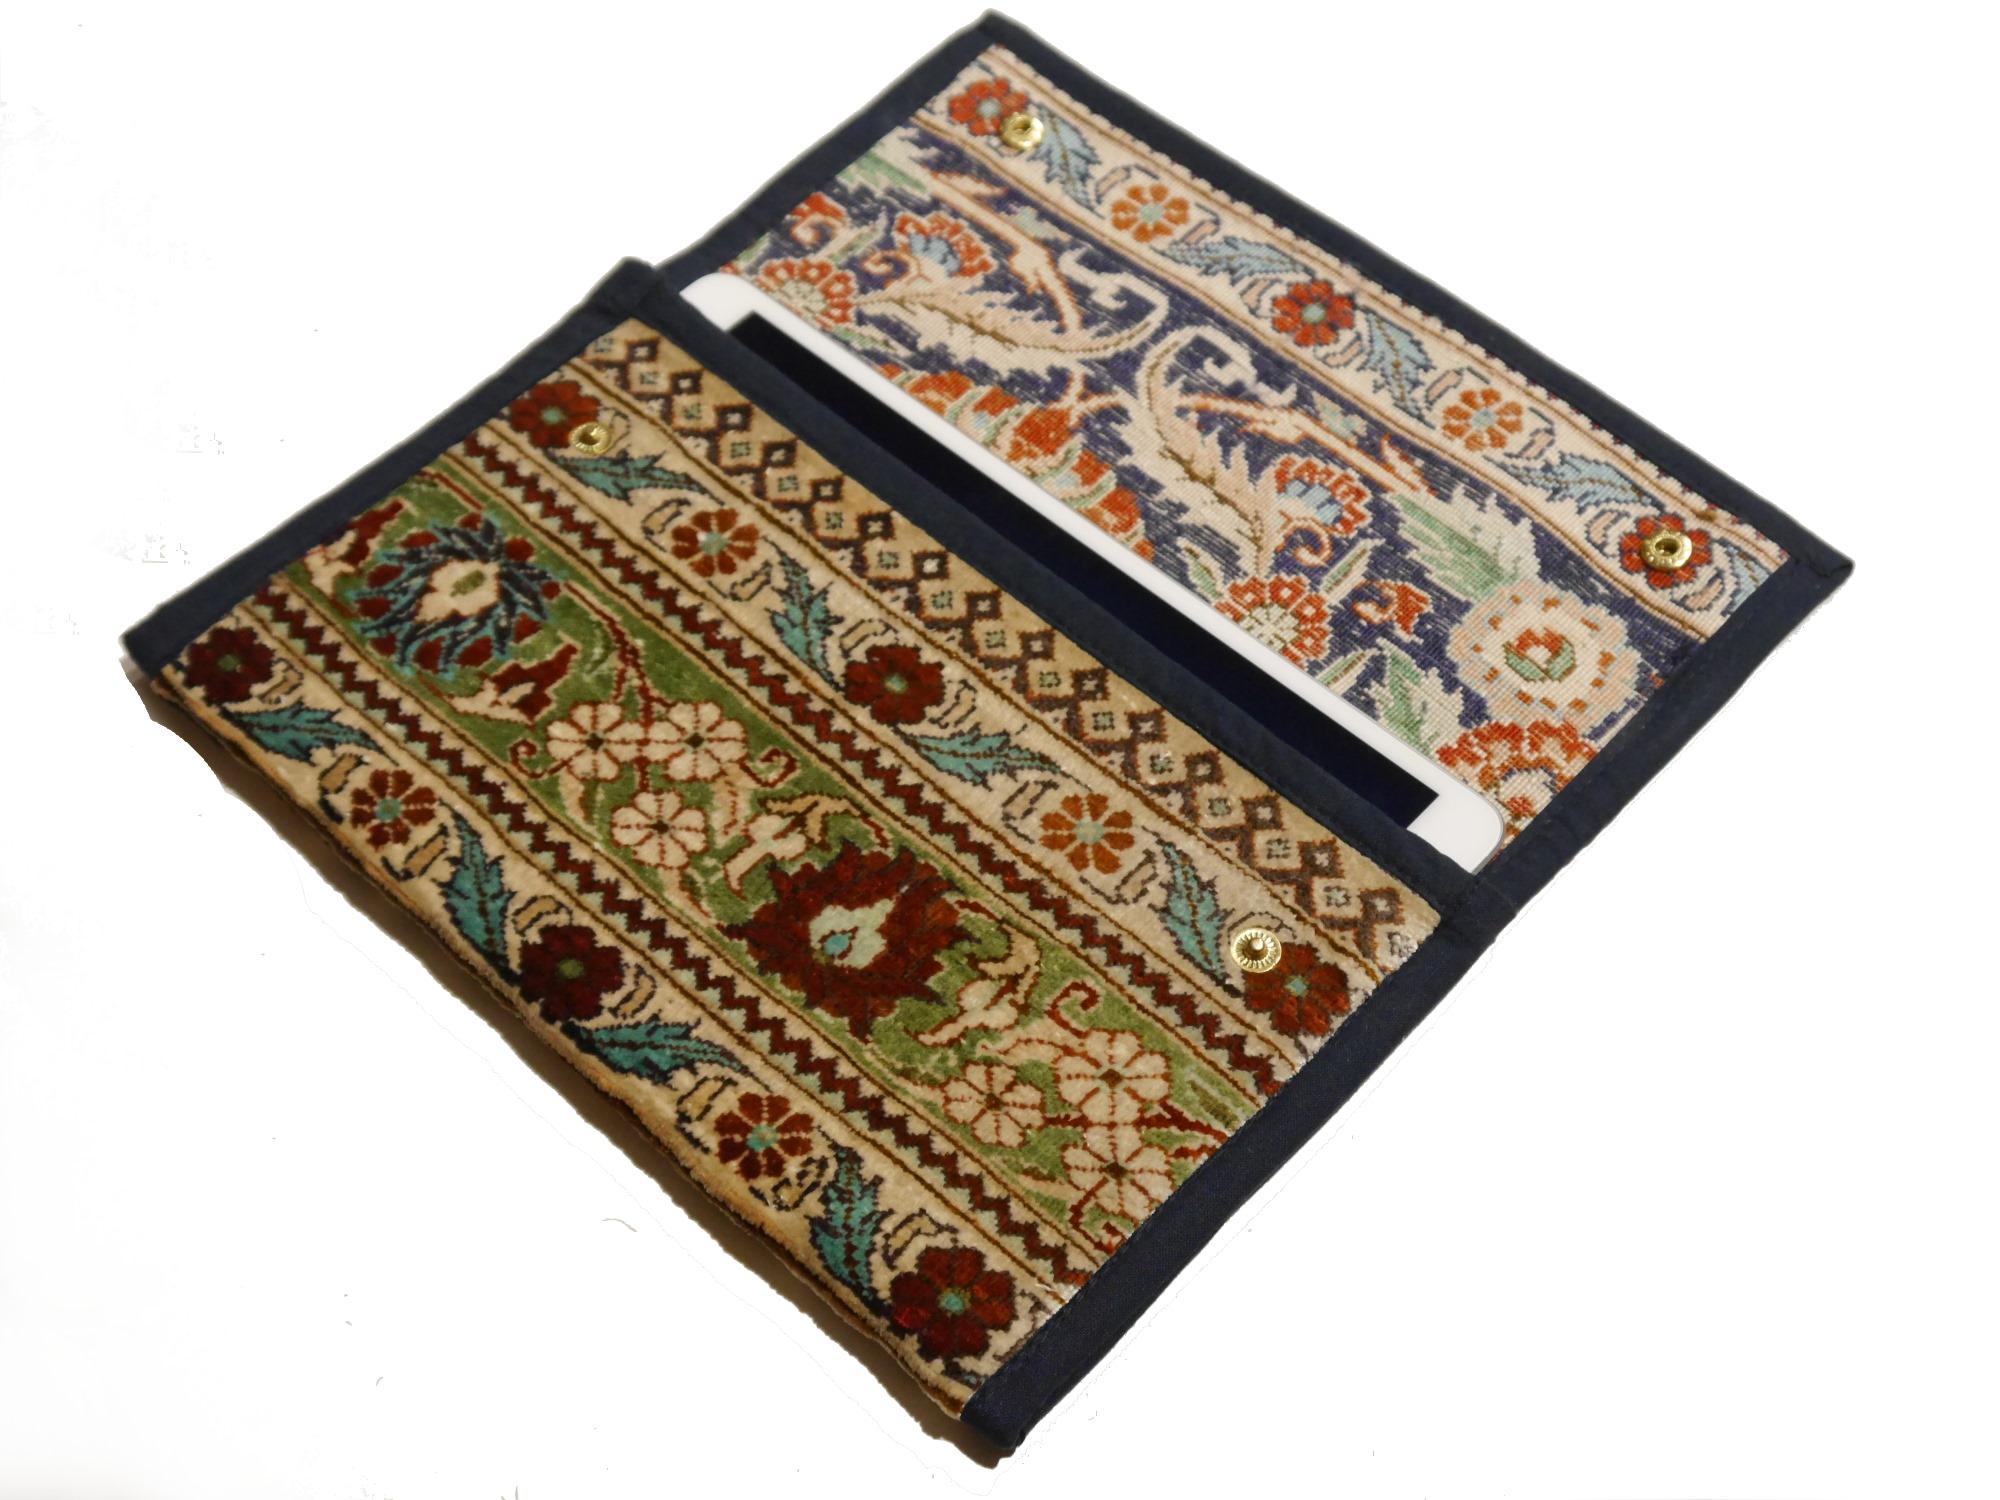 Late 20th Century Hereke Silk Rug Bag Clutch or Cover for Tablet Ipad Case For Sale